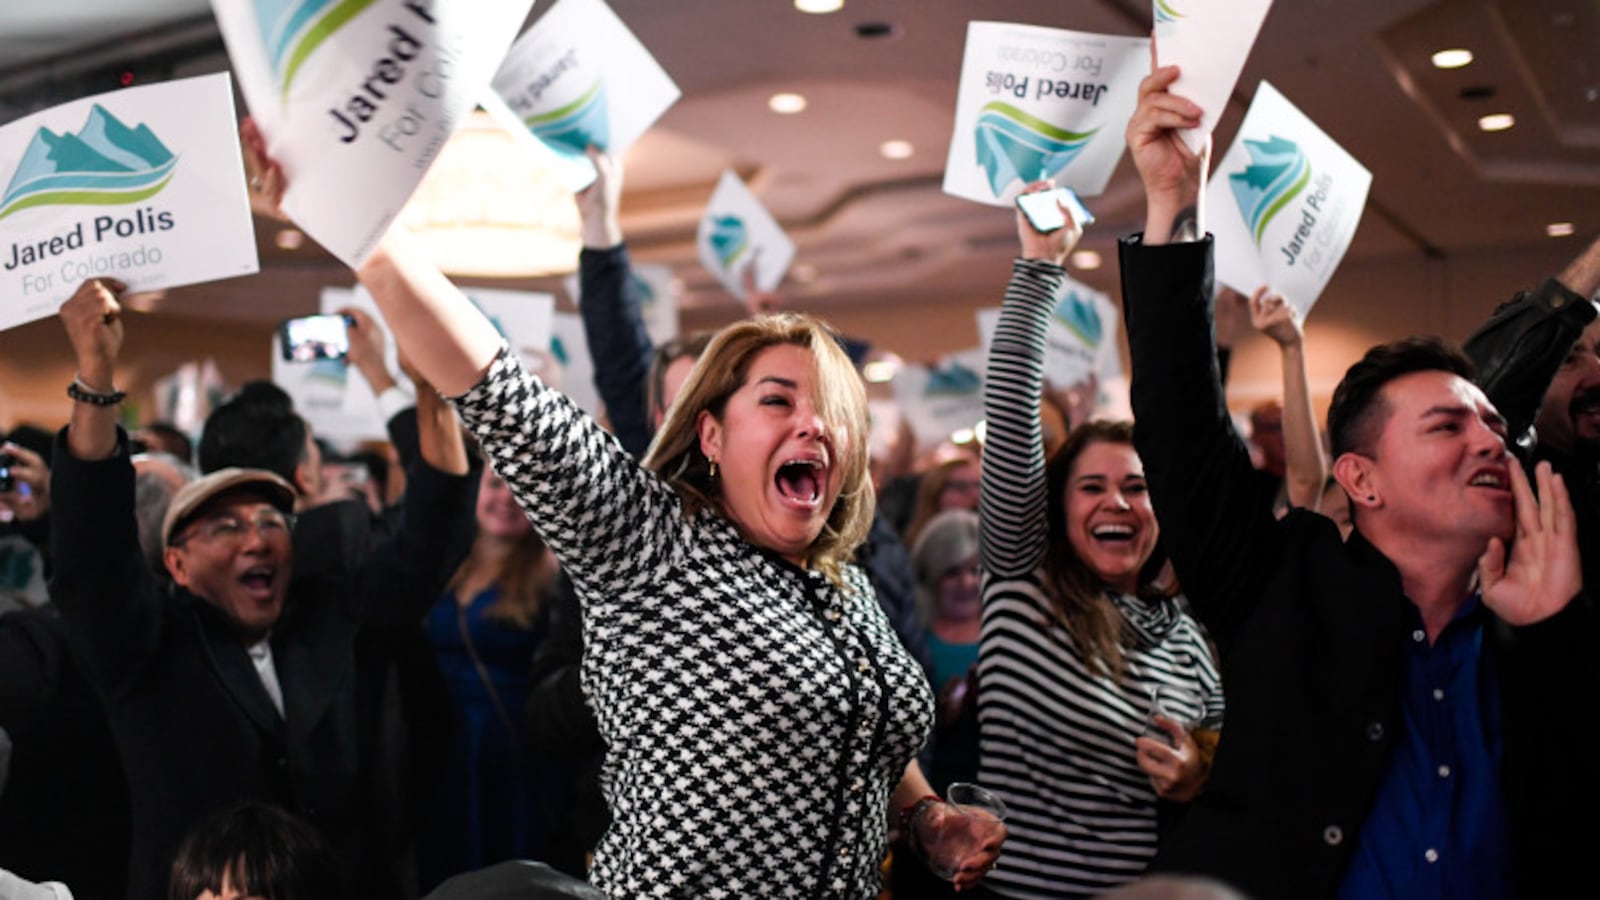 Gabriella Martinez (center) cheers for newly elected governor of Colorado Jared Polis during the Democratic party in downtown Denver on Election Night 2018.